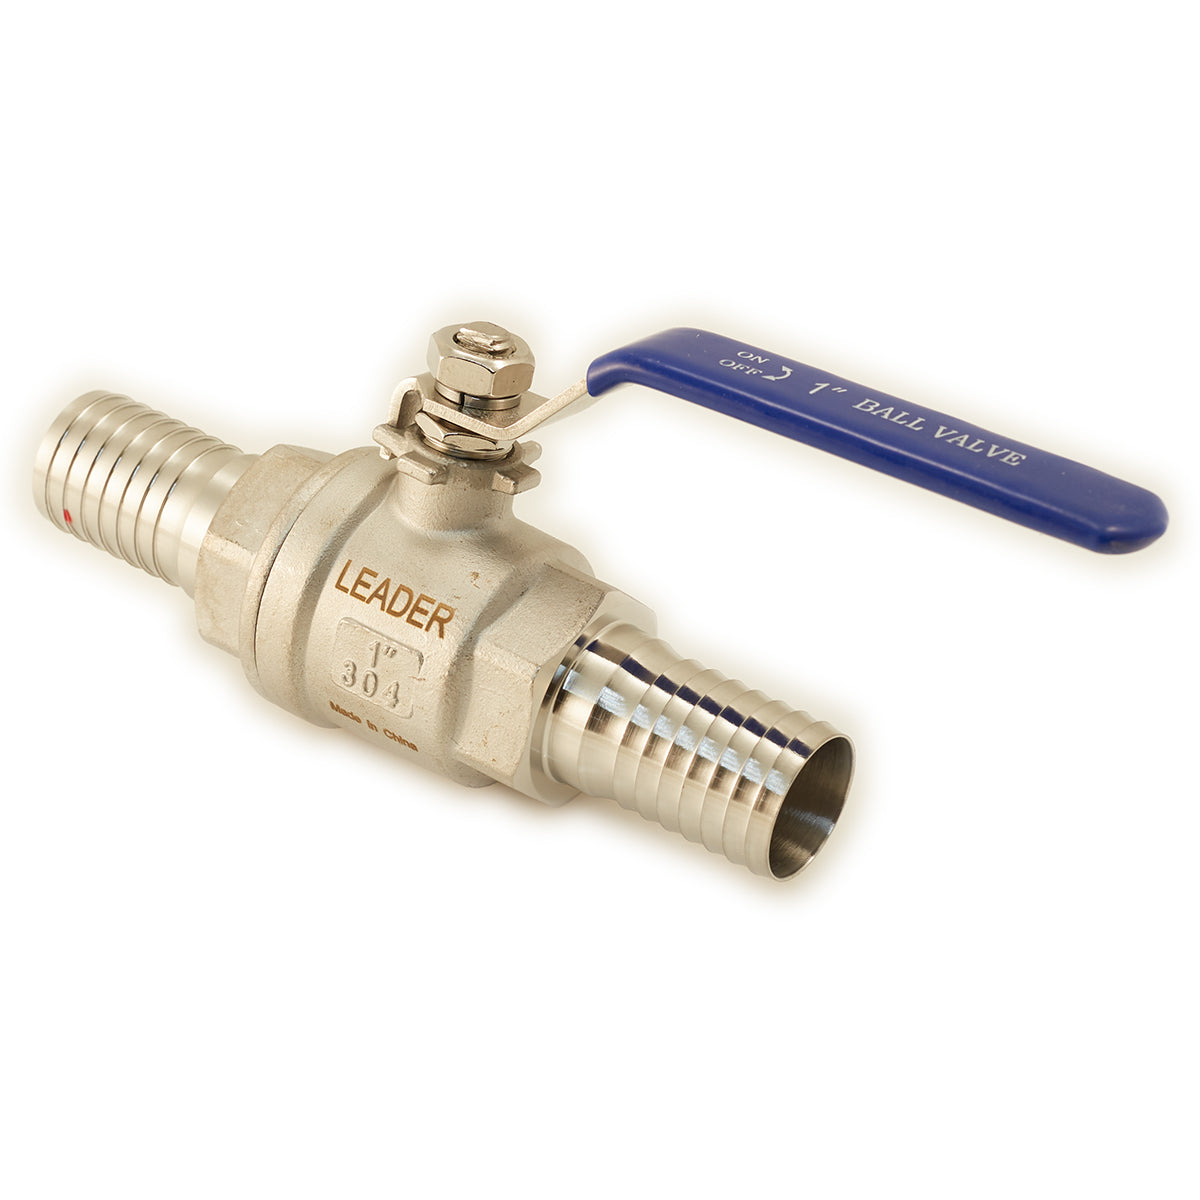 1" Stainless Ball Valve w/Barbed Fittings